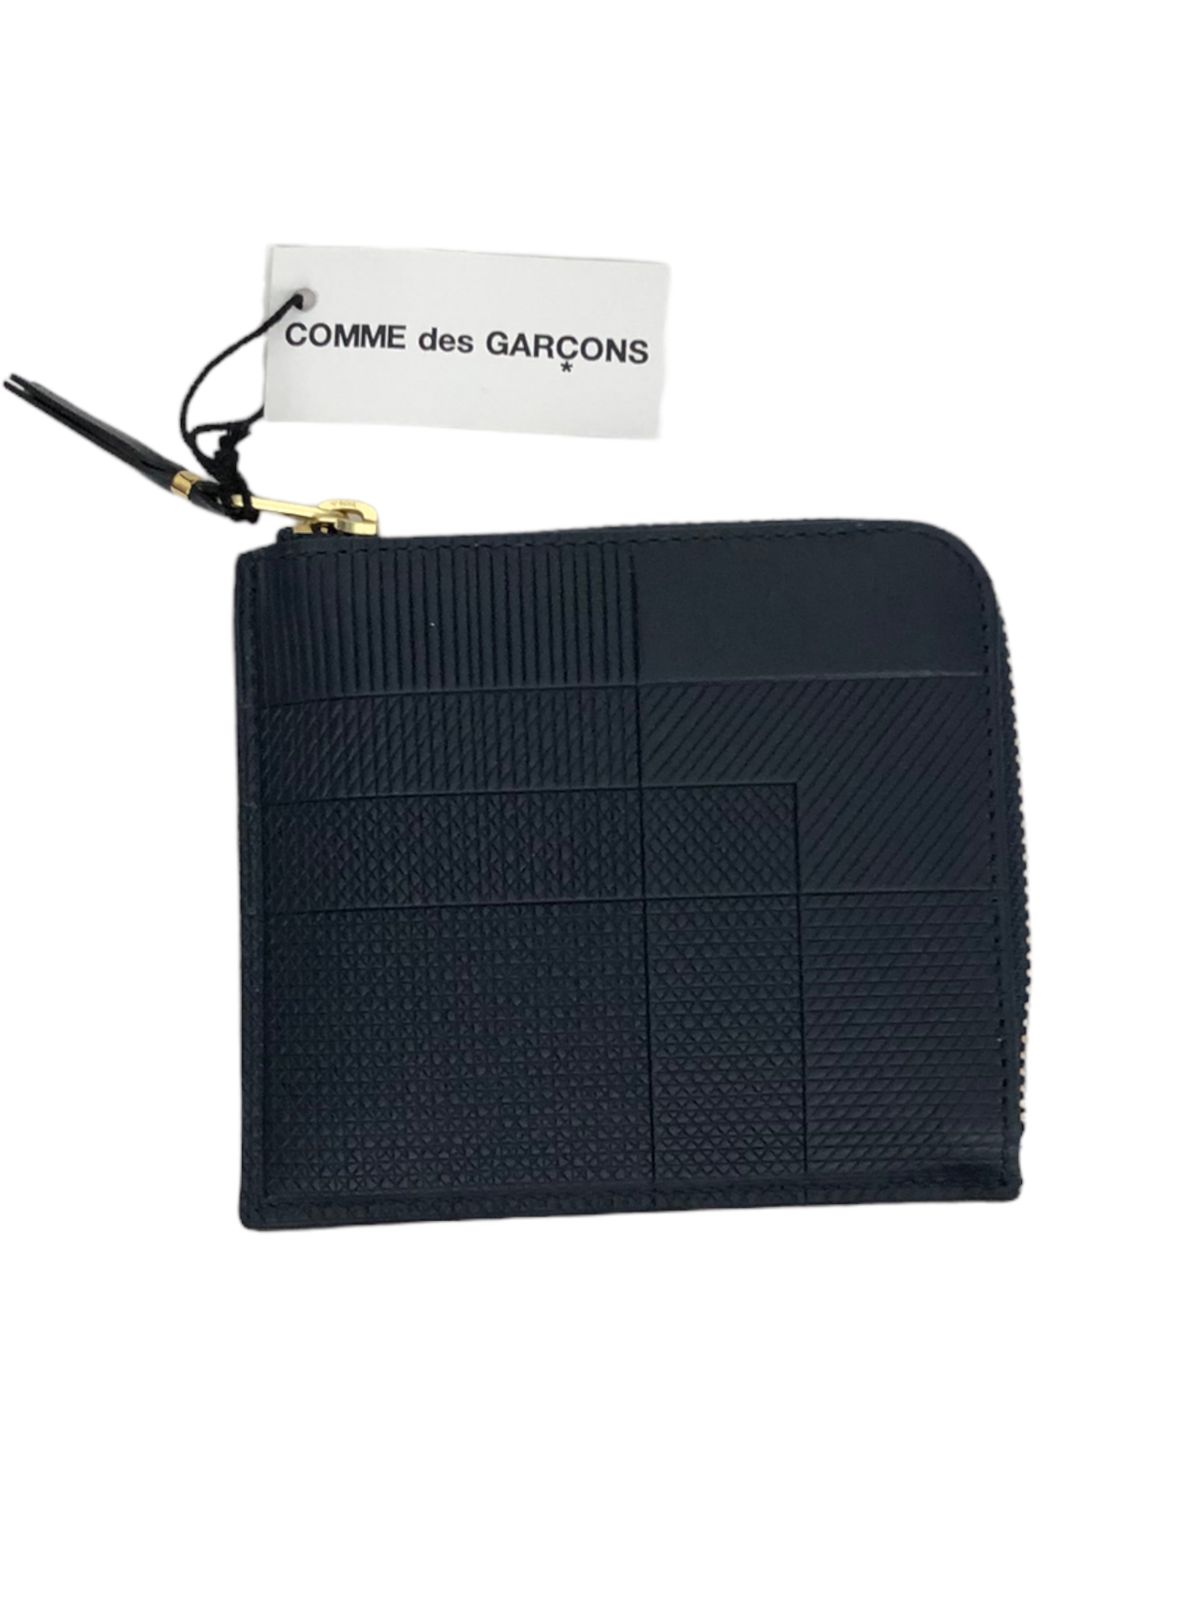 COMME des GARCONS (コムデギャルソン) INTERSECTION WALLET NV ミニ 